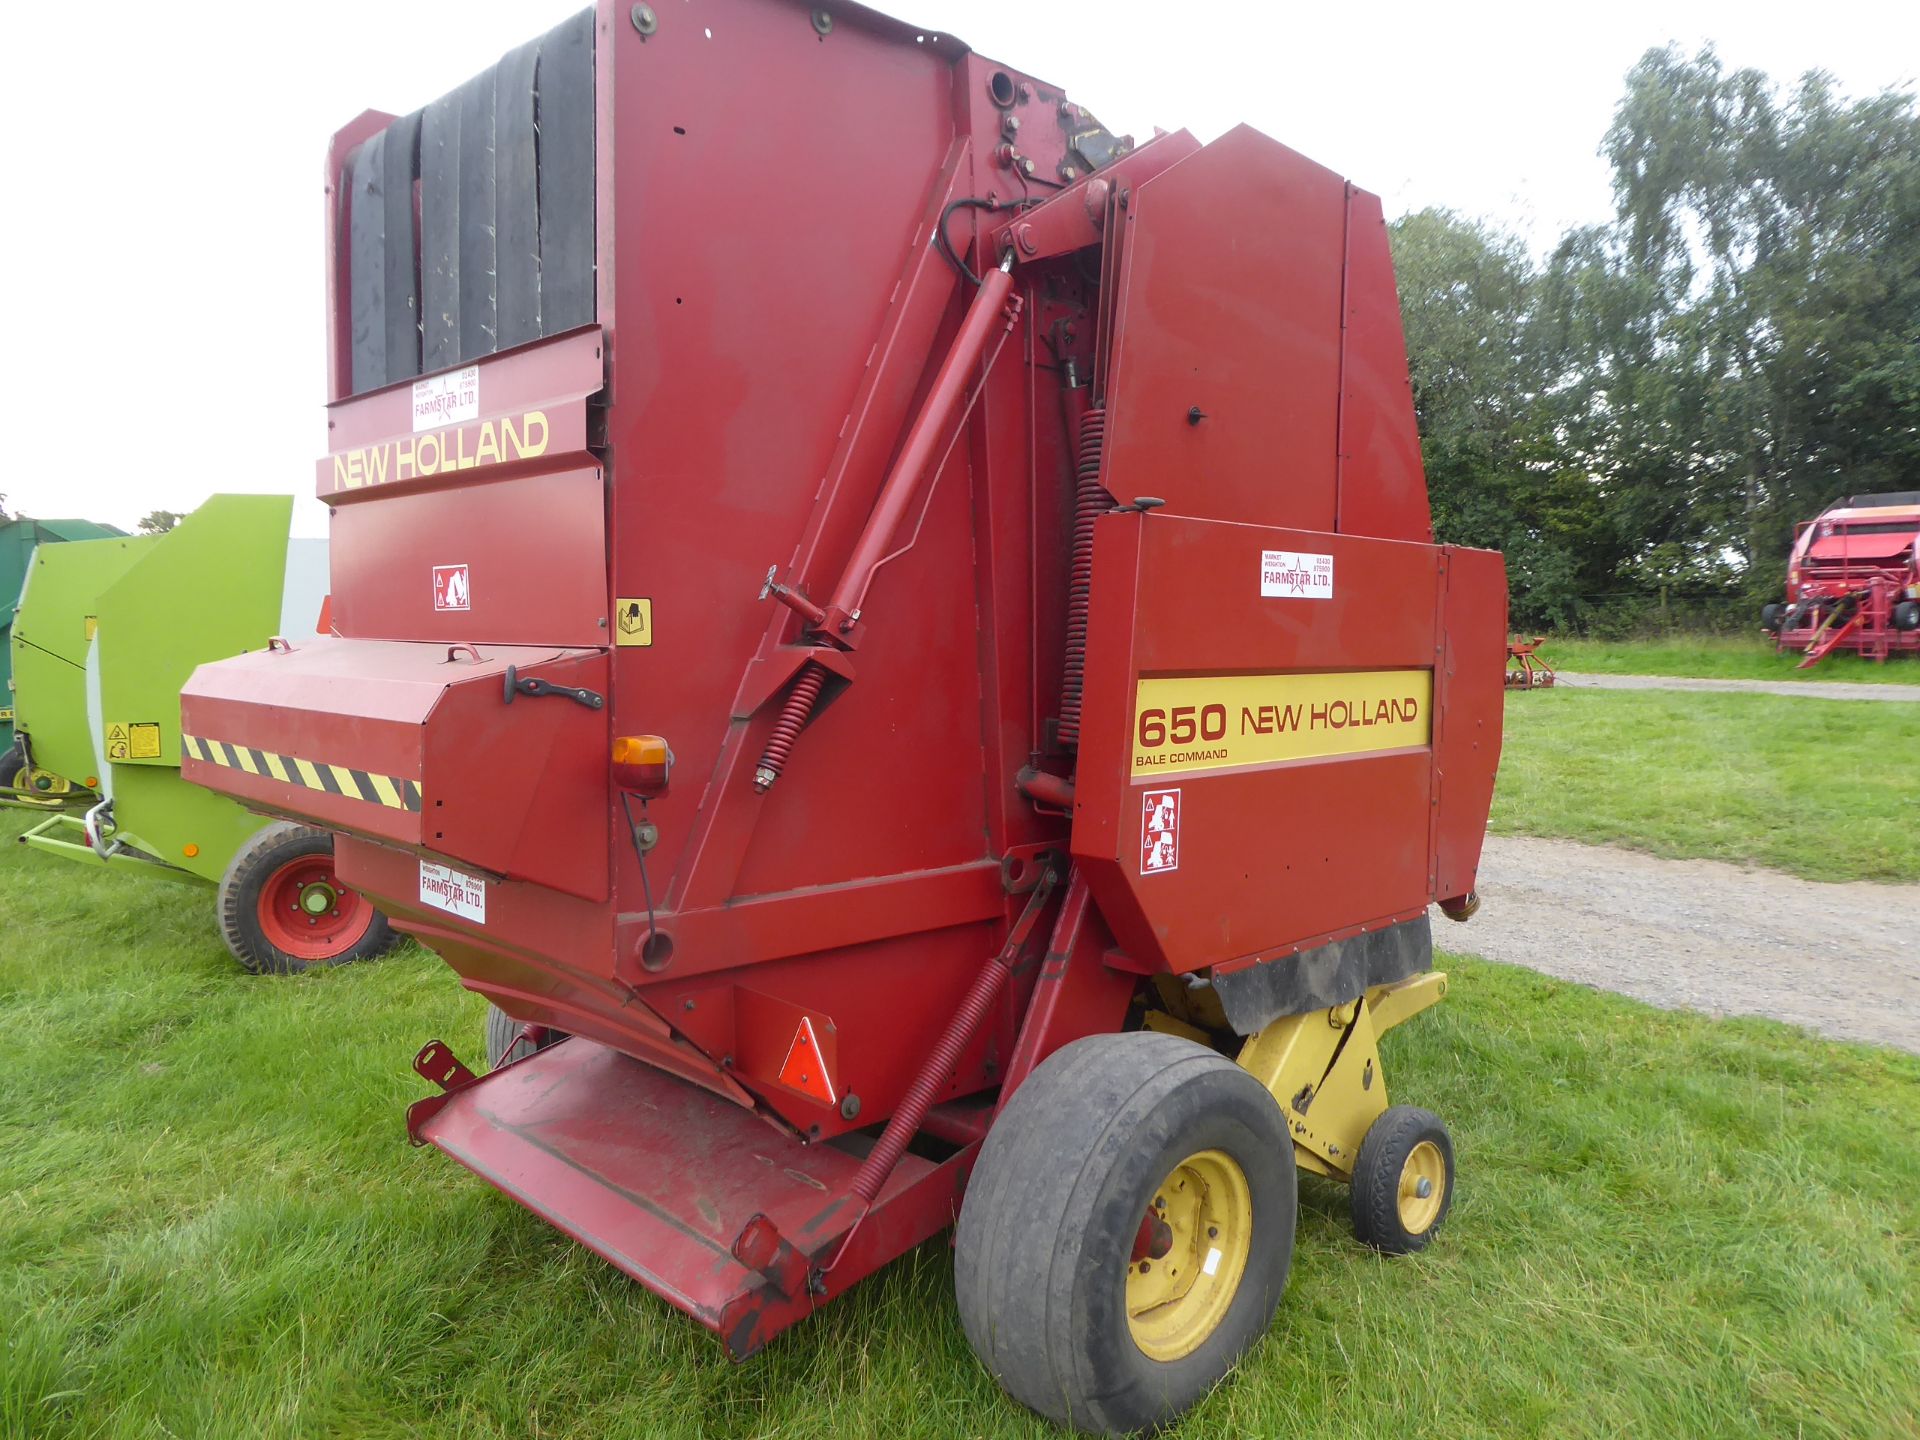 New Holland 650 Bale Command baler, variable chamber belt, approx 45000 bales, PTO & control box, - Image 2 of 2